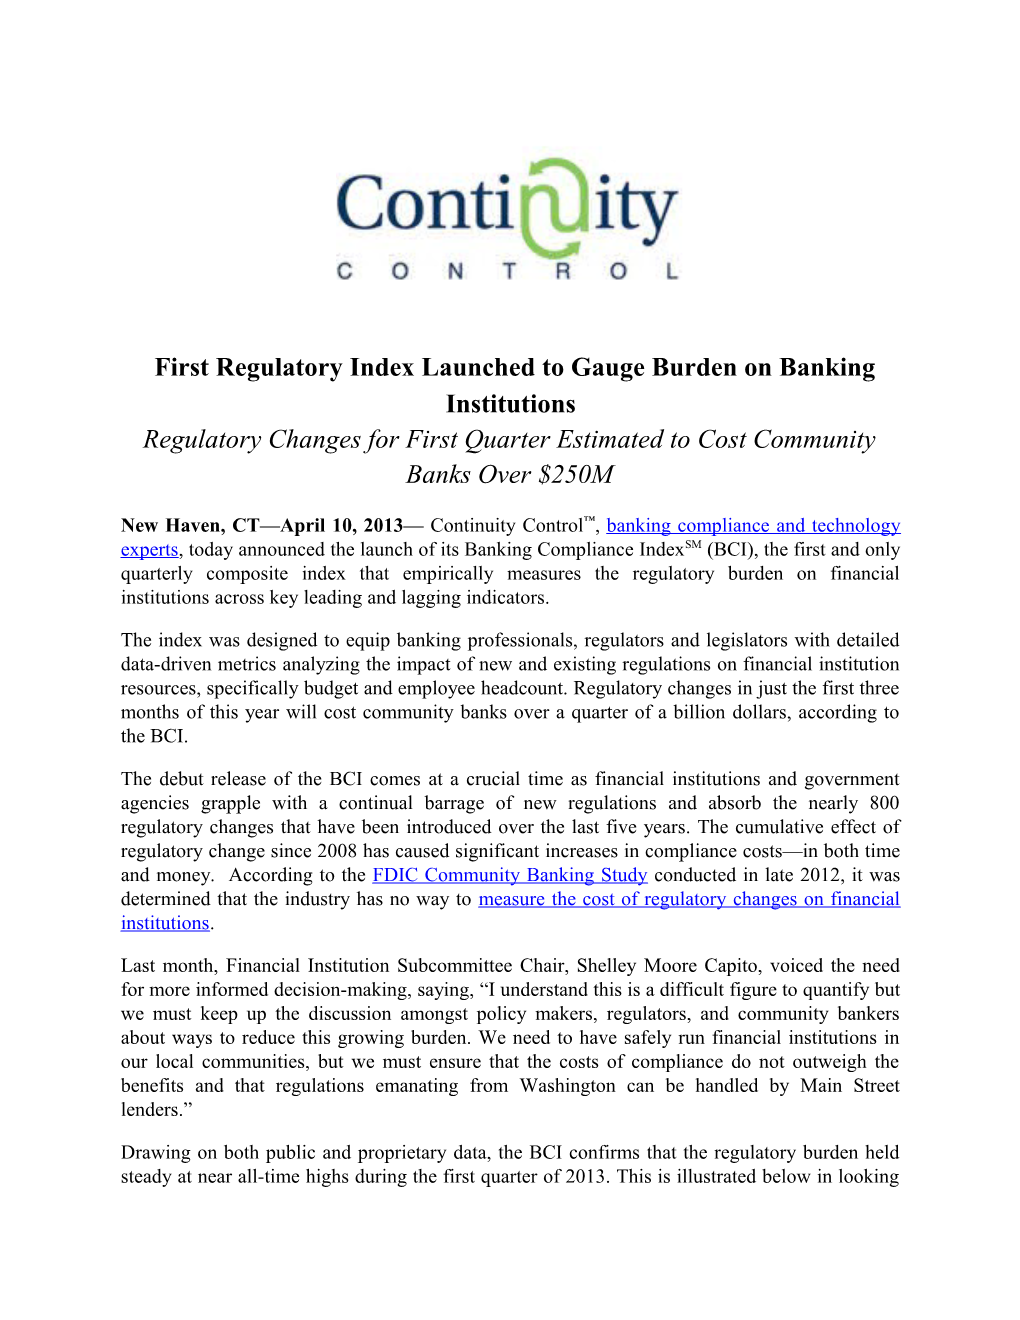 First Regulatory Index Launched to Gauge Burden on Banking Institutions